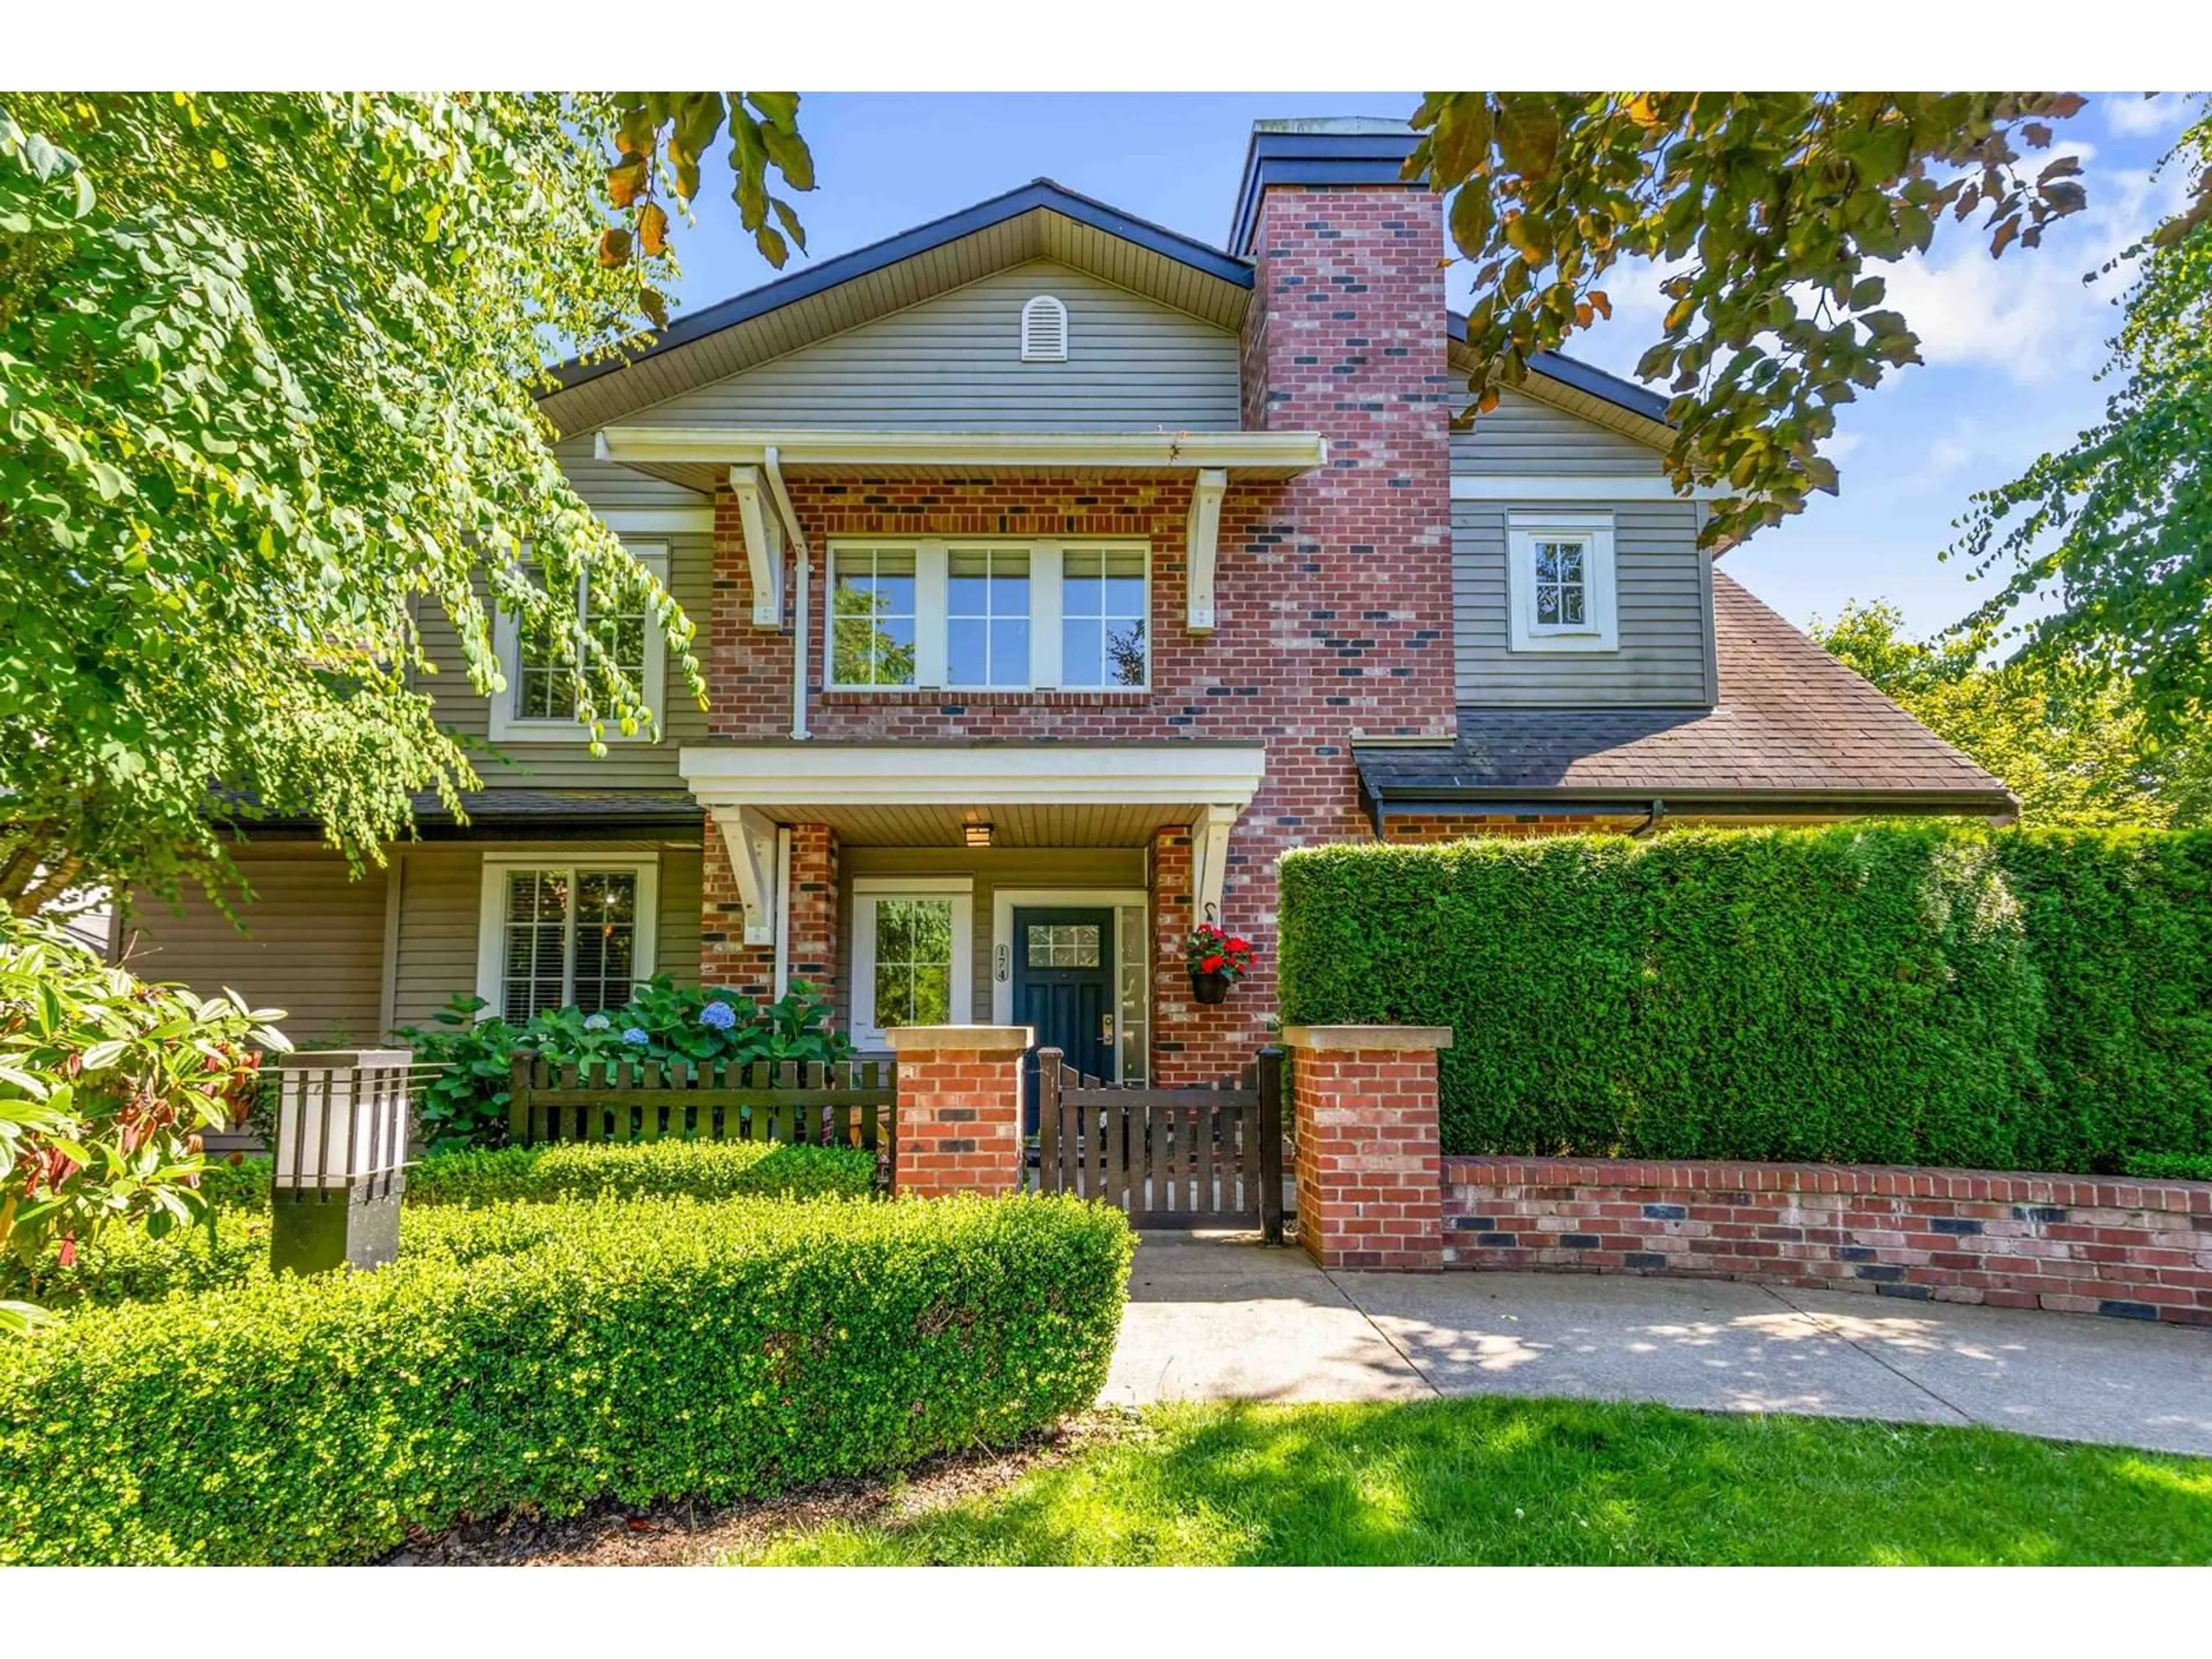 Home with brick exterior material for 174 2450 161A STREET, Surrey British Columbia V3Z8K4